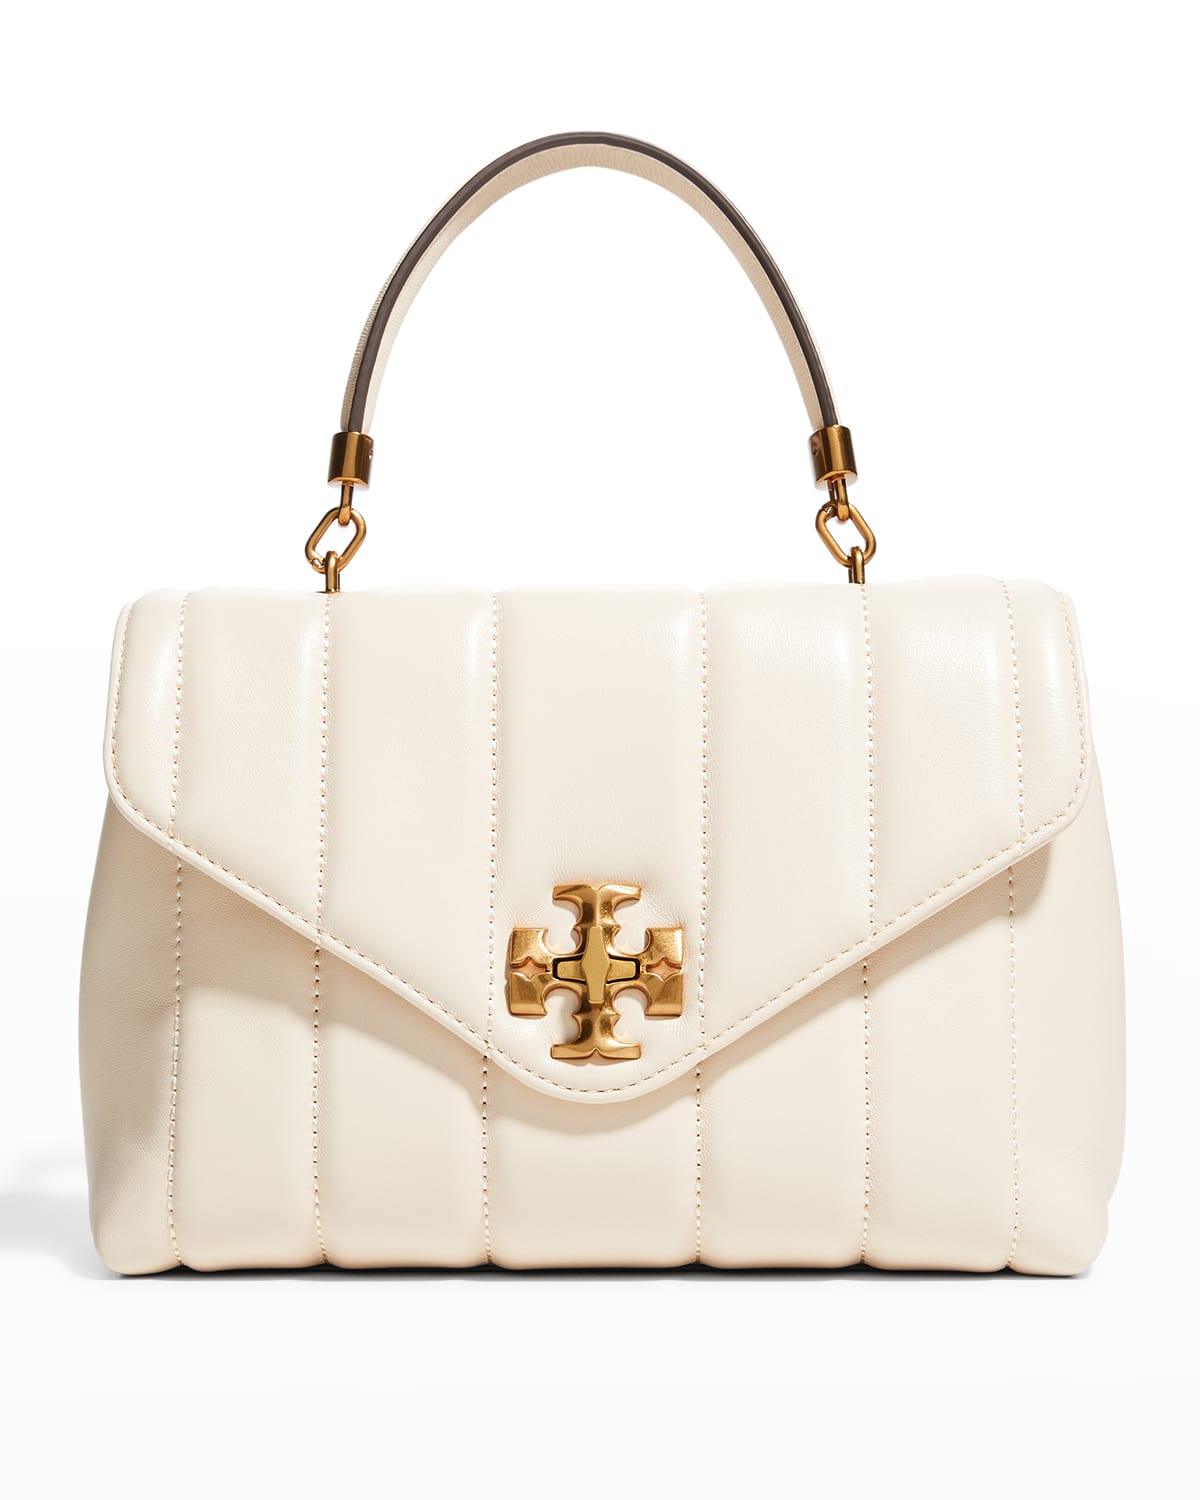 Tory Burch White Leather Bag | Neiman Marcus